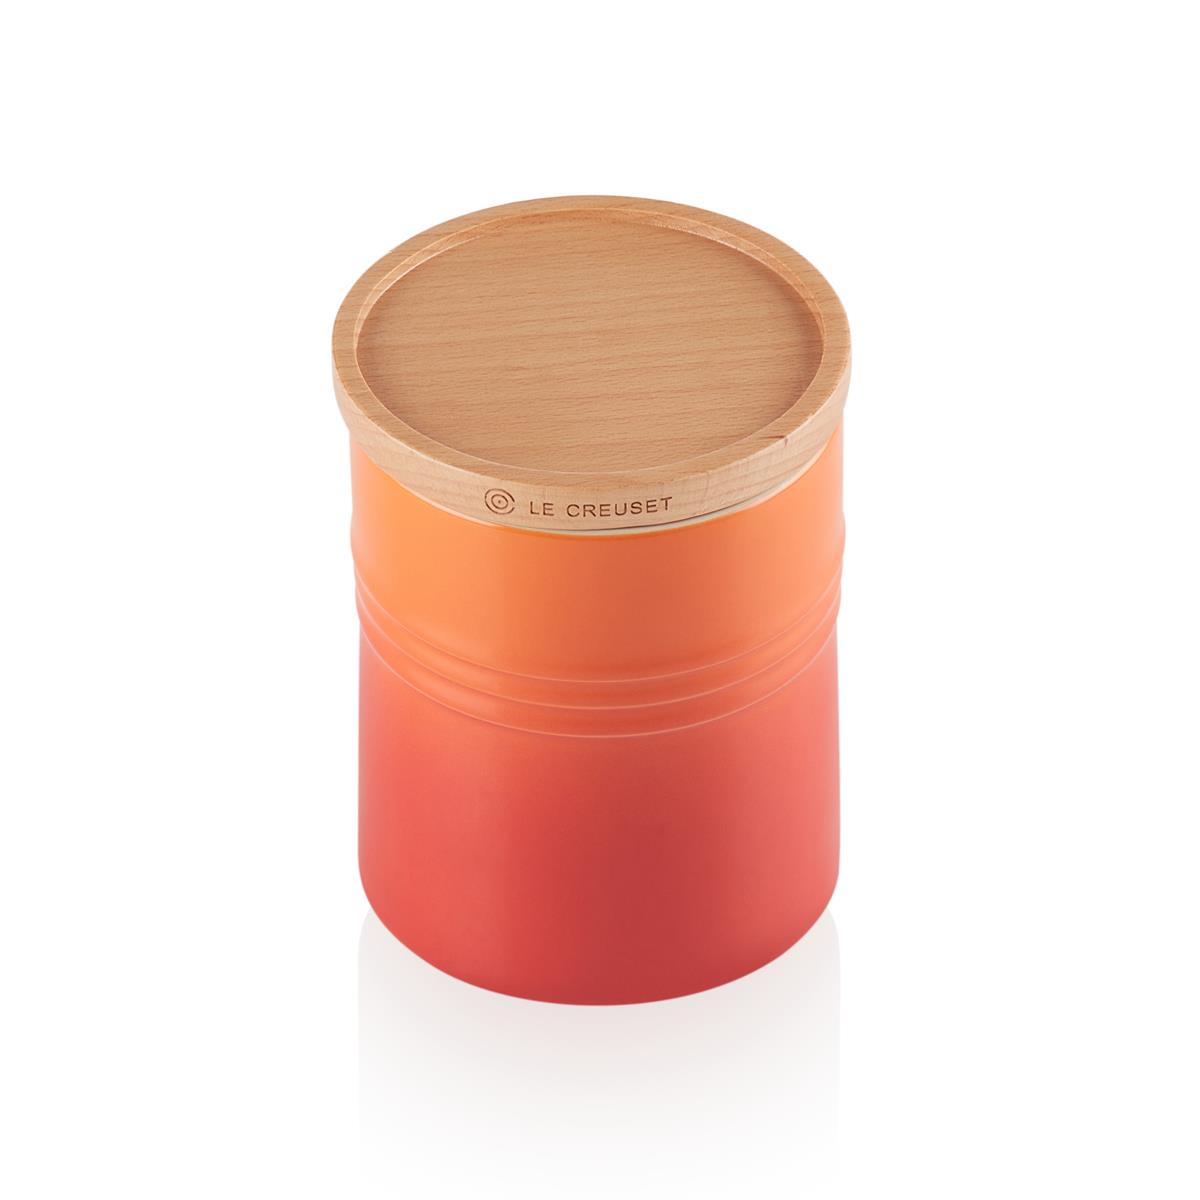 What is the capacity of the le creuset storage jar?